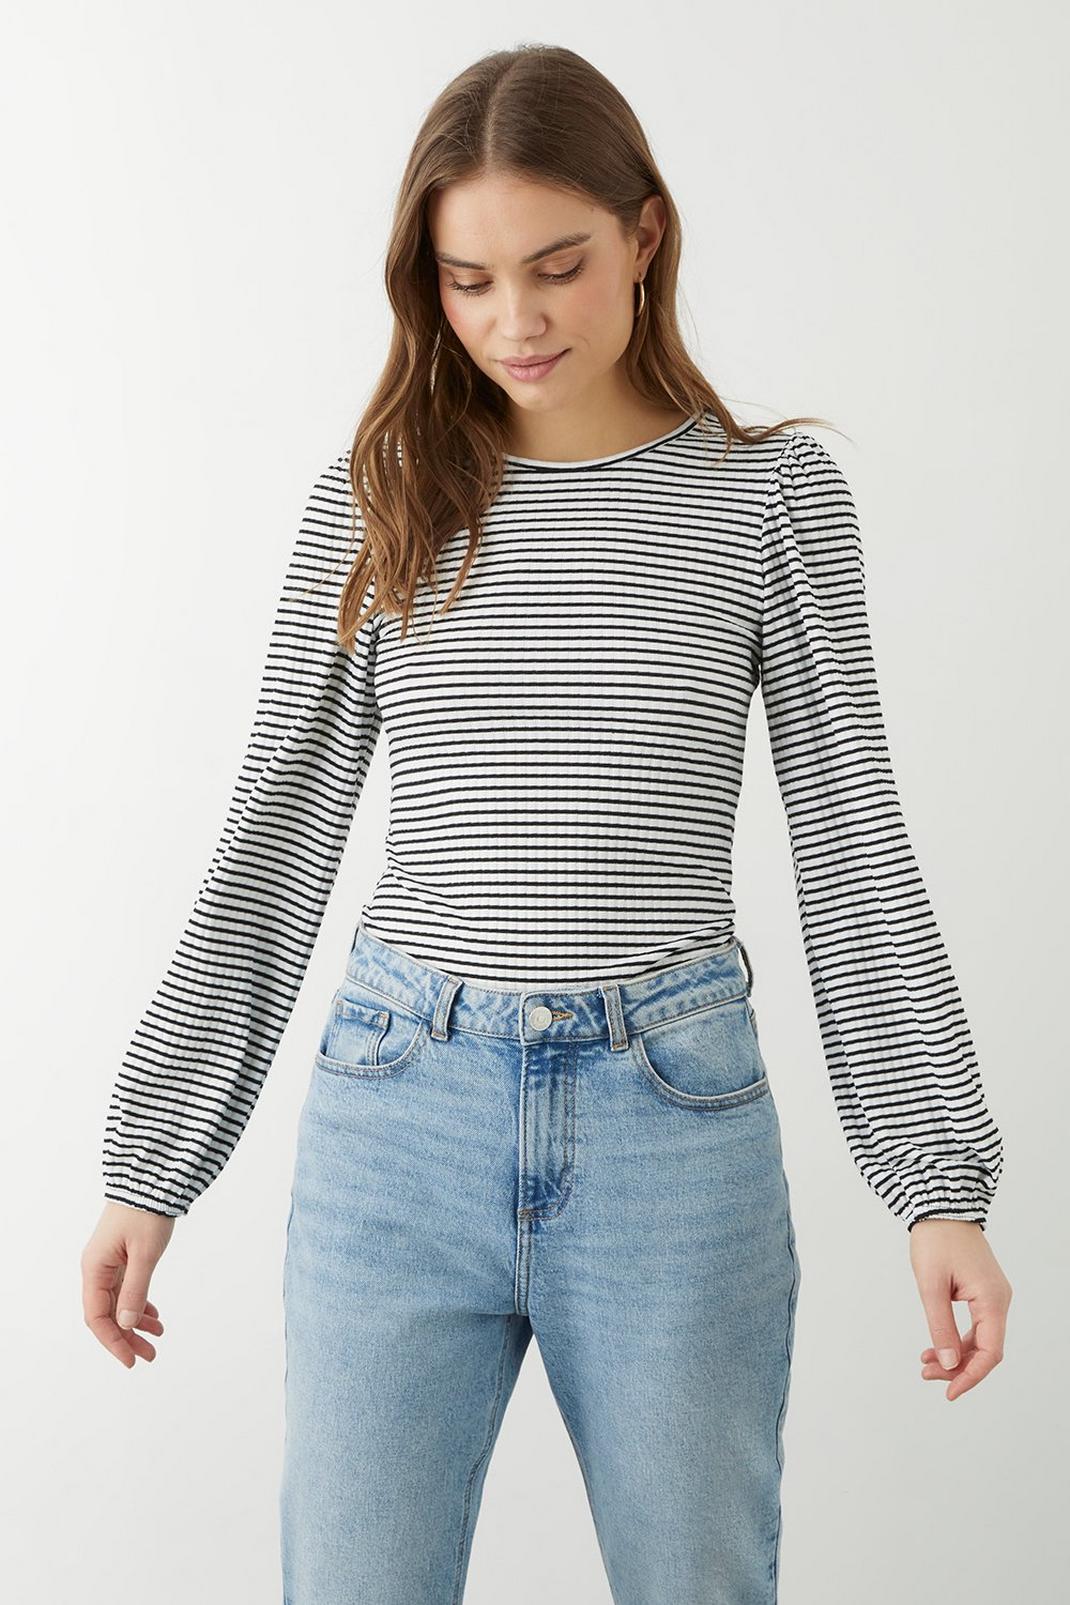 White Stripe Crew Neck Long Sleeve Top image number 1